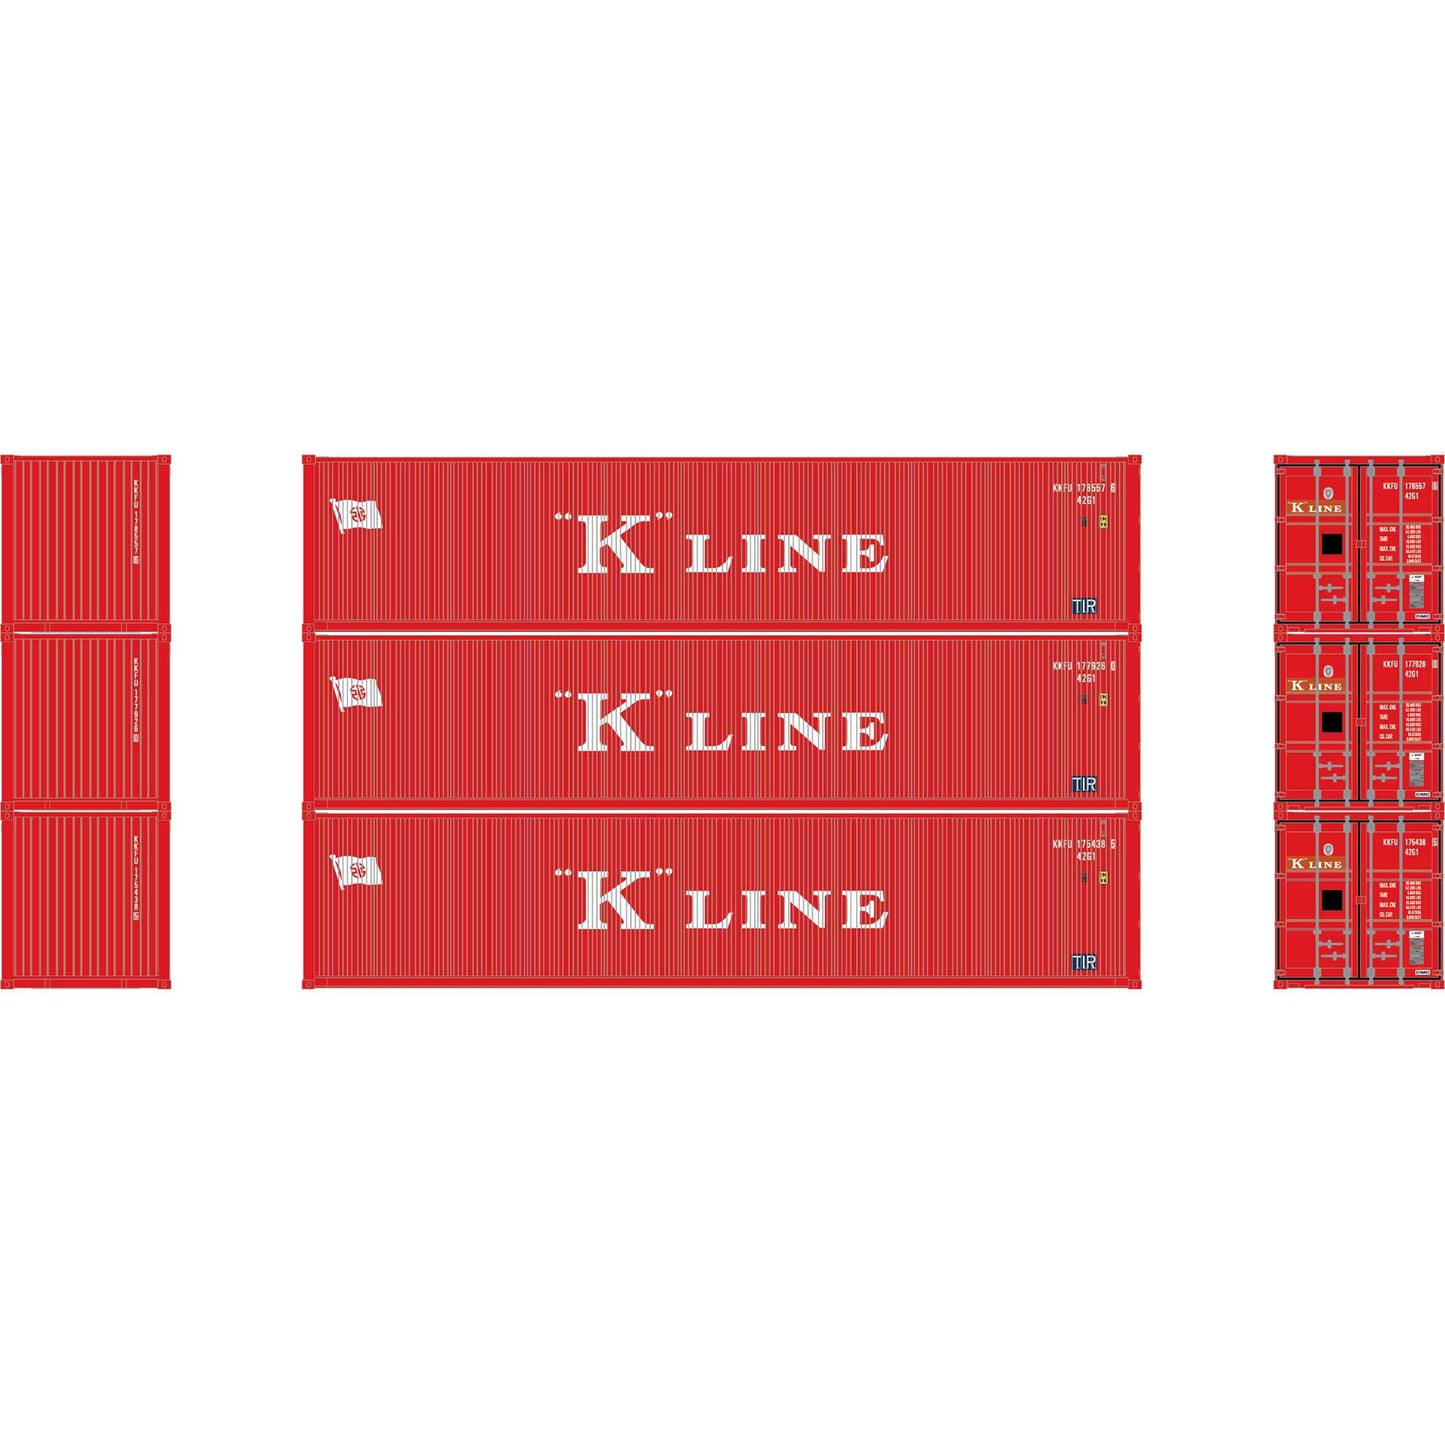 N 40' Corrugated Low-Cube Container, K Line #2 (3)